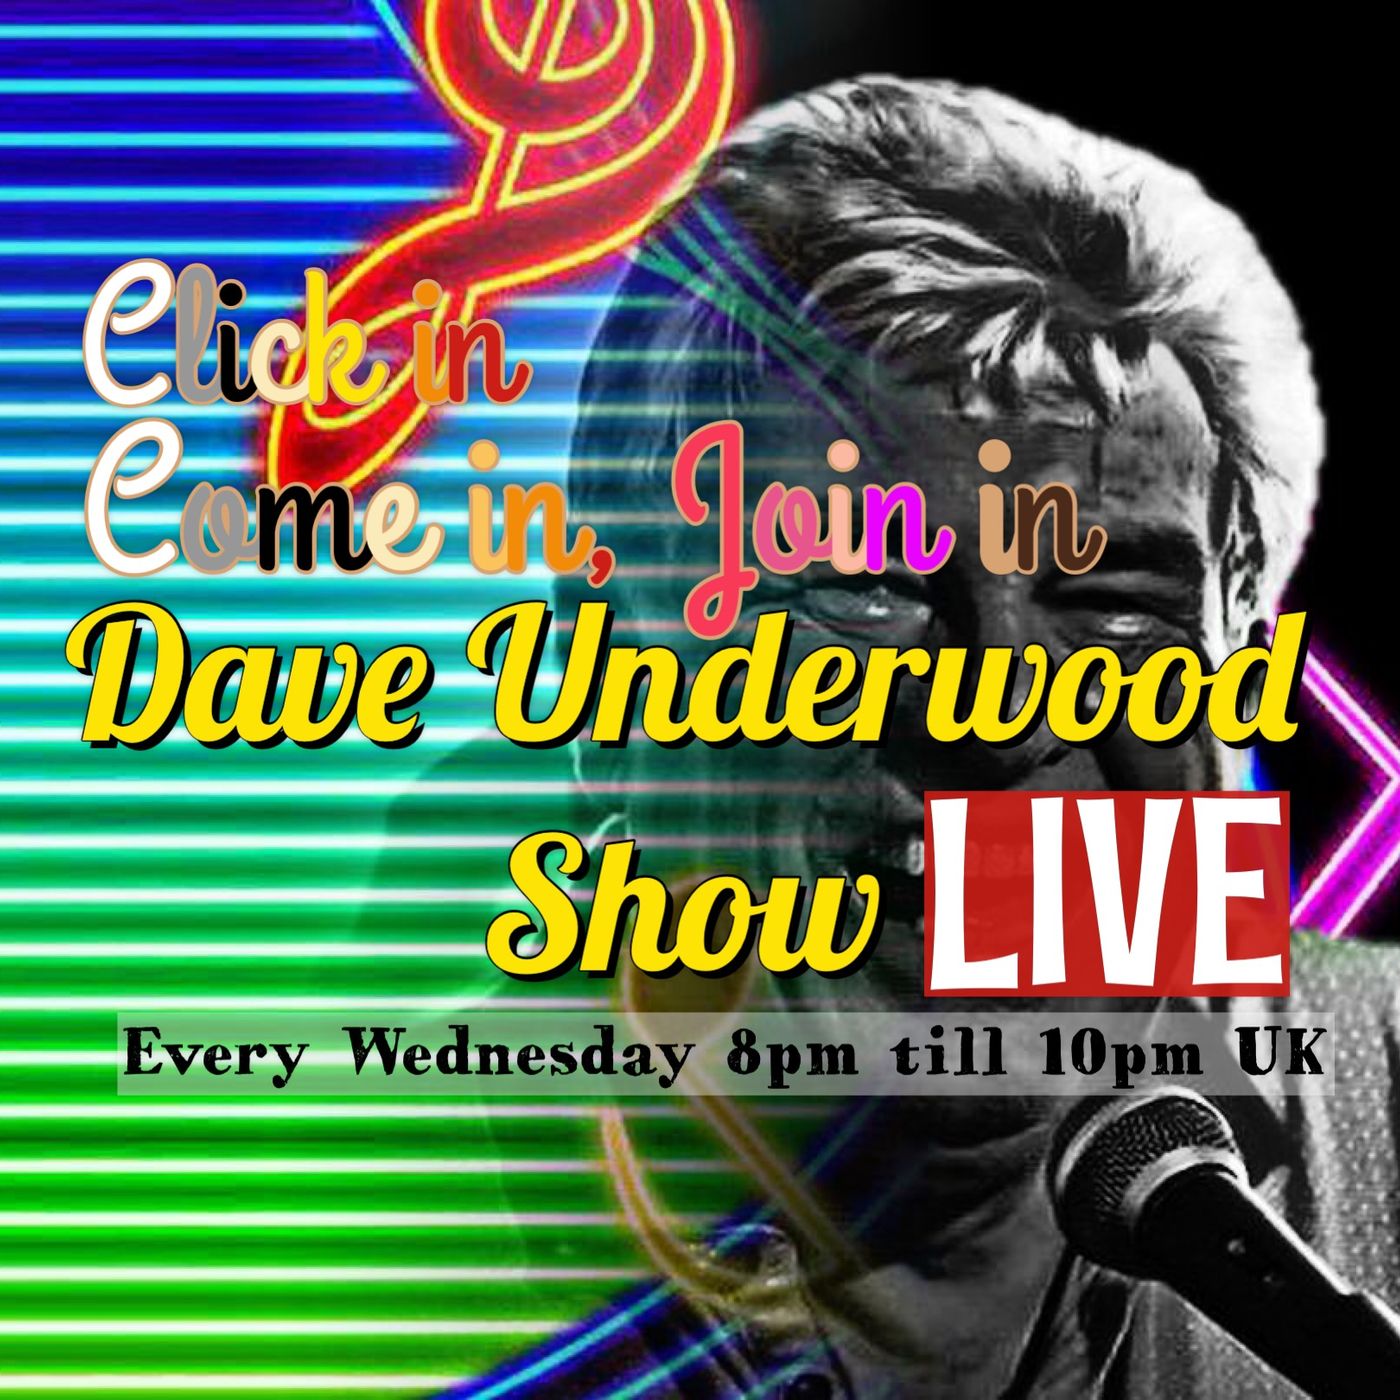 The Dave Underwood Show